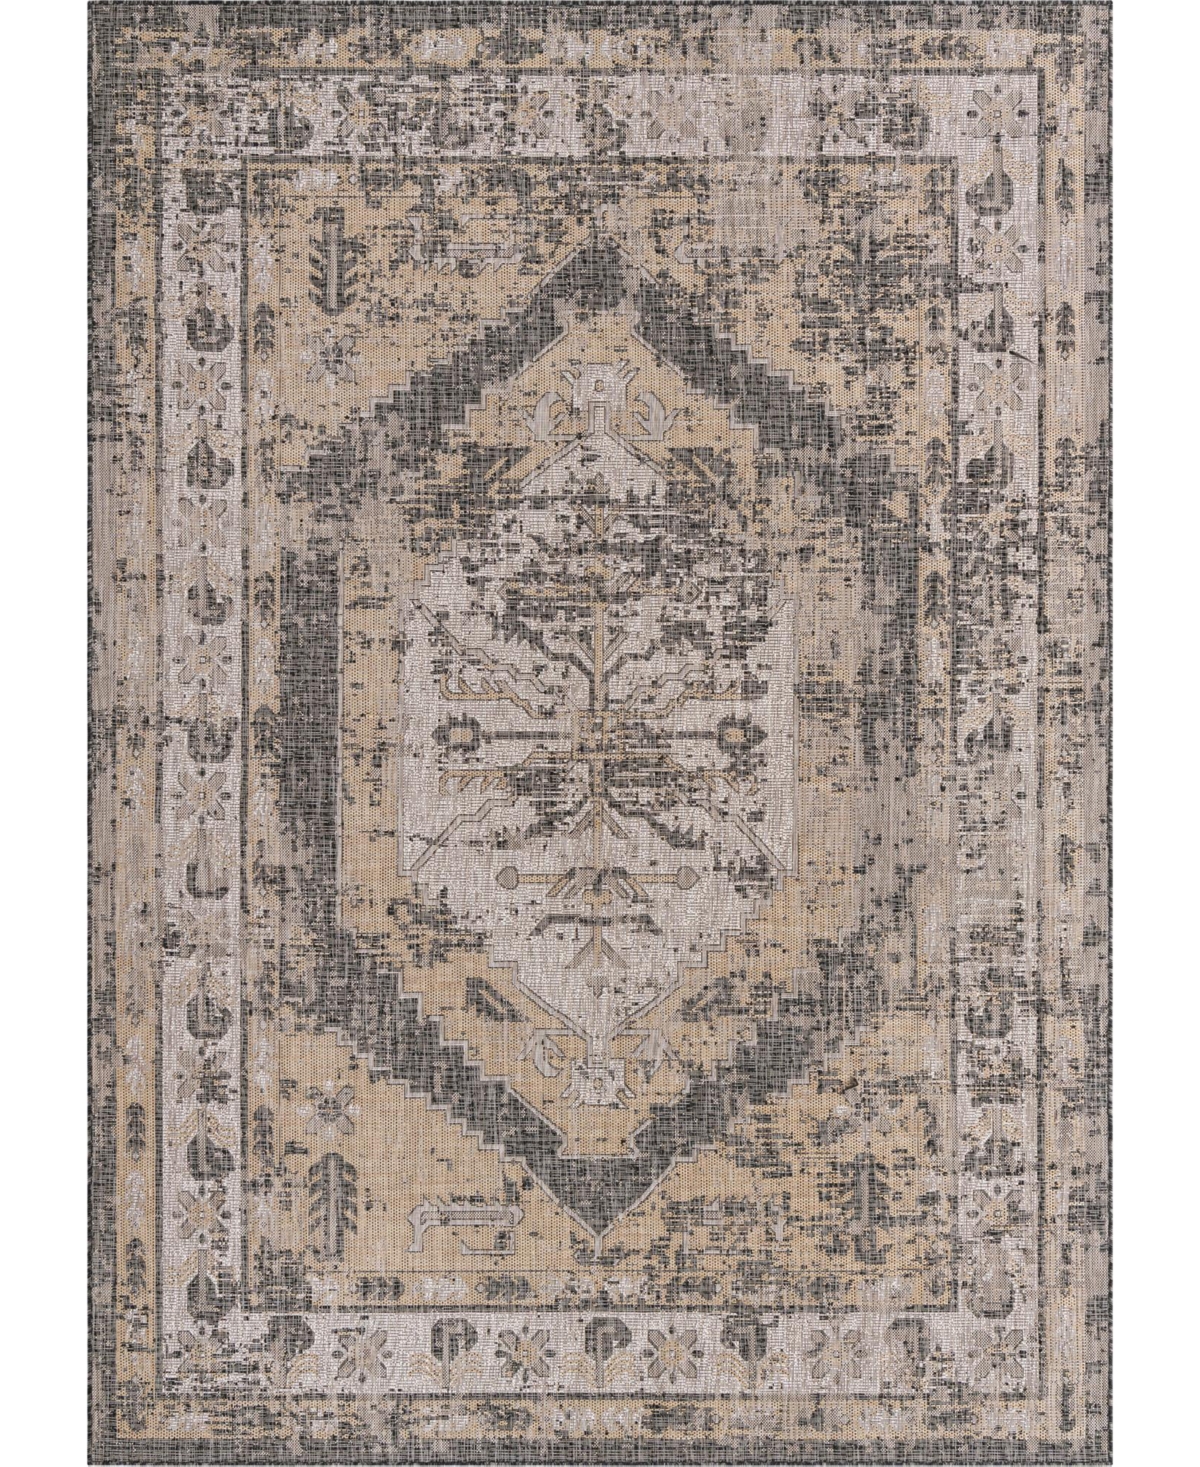 Bayshore Home Outdoor Bh Pashio Traditional Ii Valeria 7'10" X 11' Area Rug In Charcoal